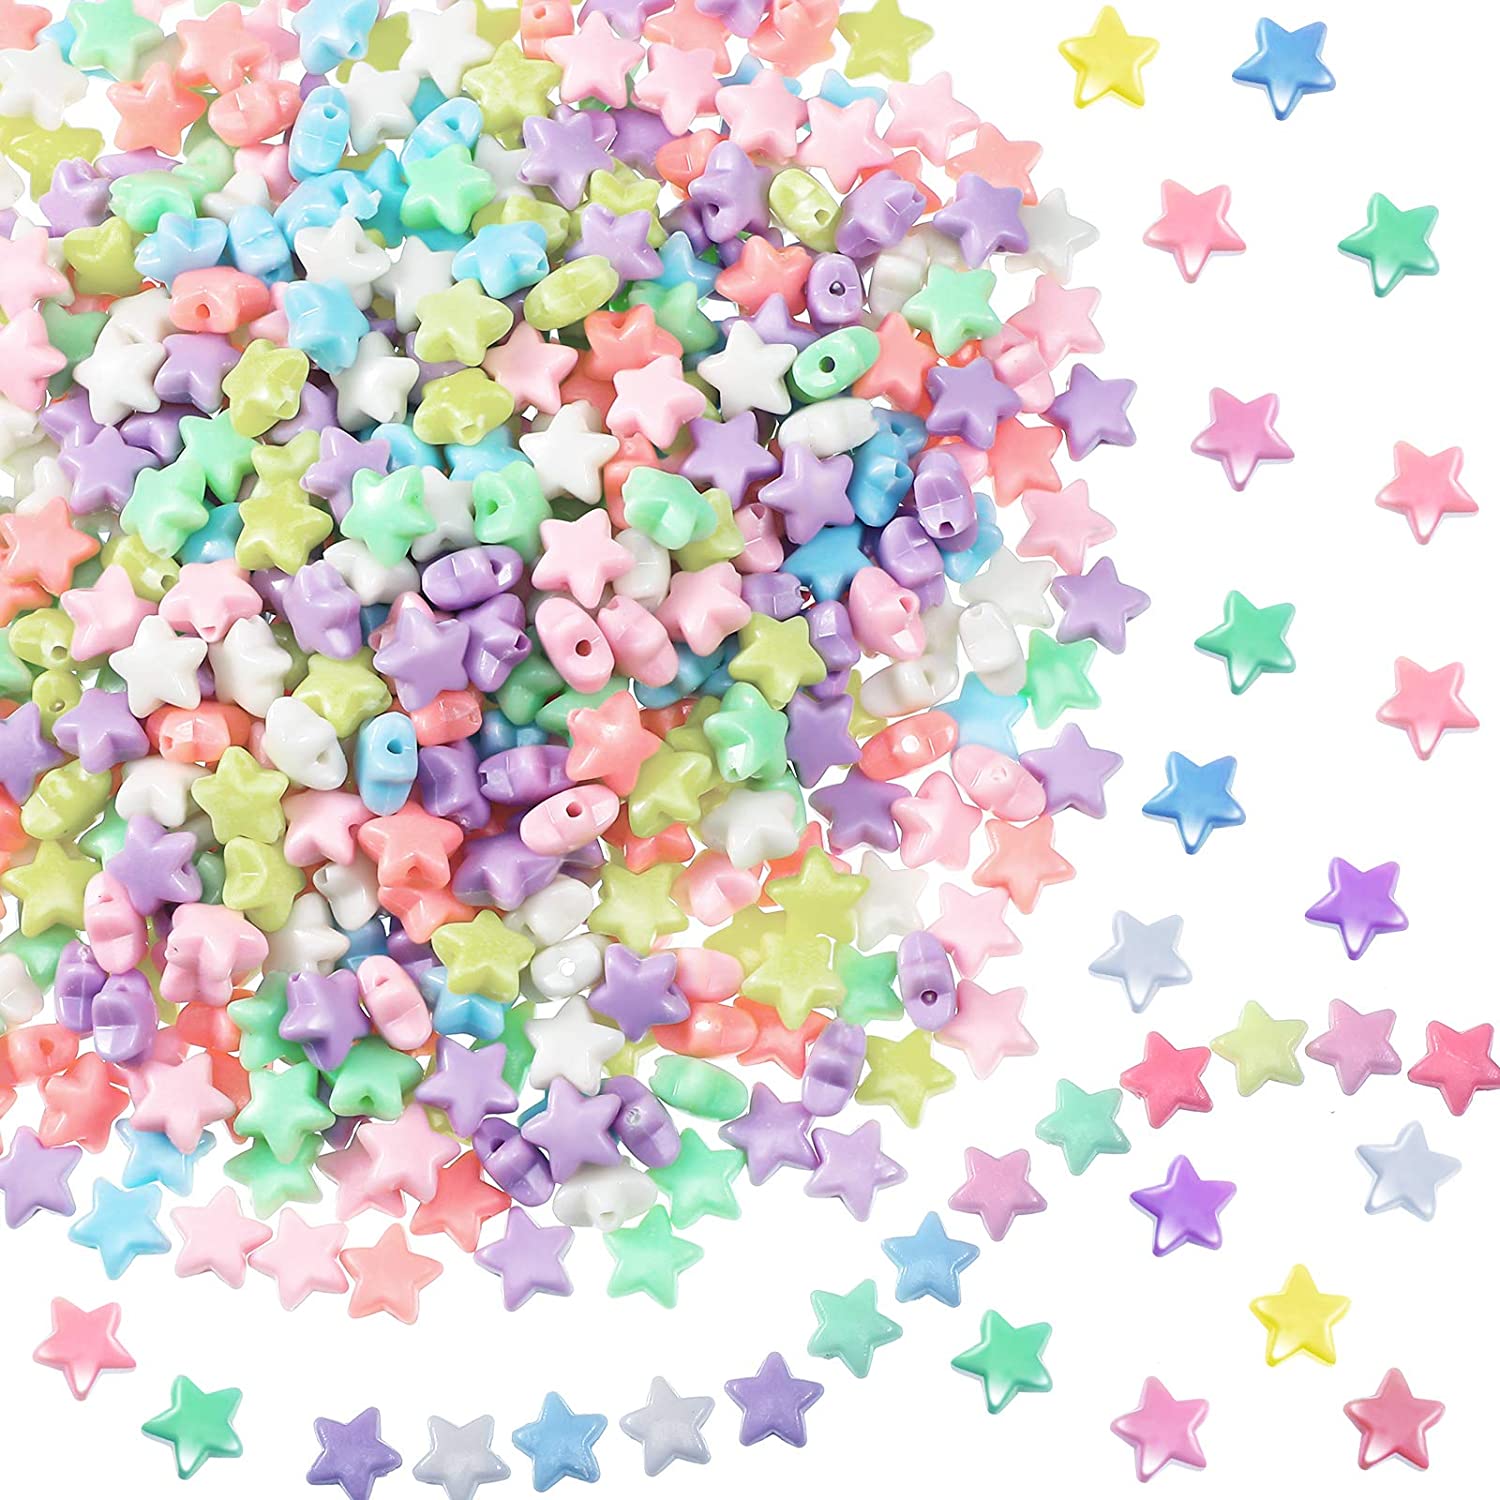 Mulutoo 500 Pcs Candy Color Acrylic Star Beads Colorful Assorted Mix Plastic Pastel Beads Spacer Beads Star Shape Pony Beads ,for DIY Jewelry Craft